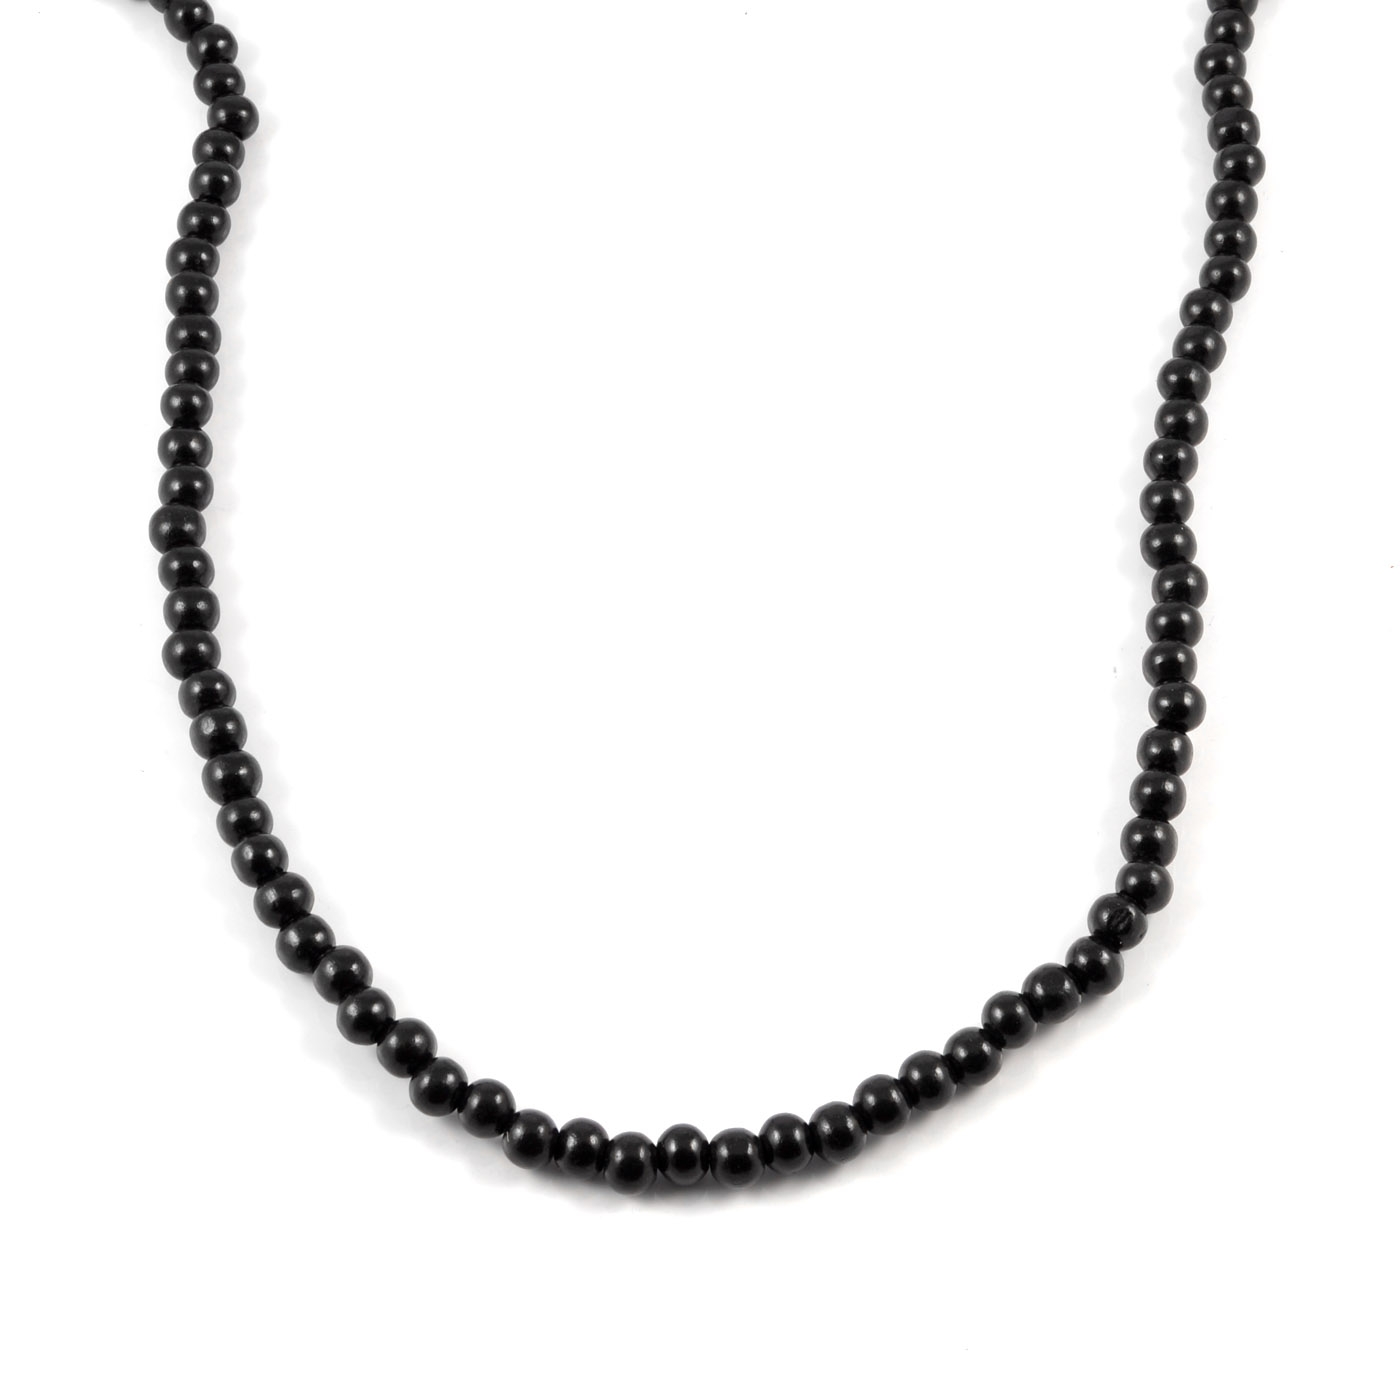 Smooth Stone Bead Necklace Men Simple Handmade Round Black Beaded Necklace  For Men Jewelry Gift F98R9 (width 10mm- 45cm) | Amazon.com